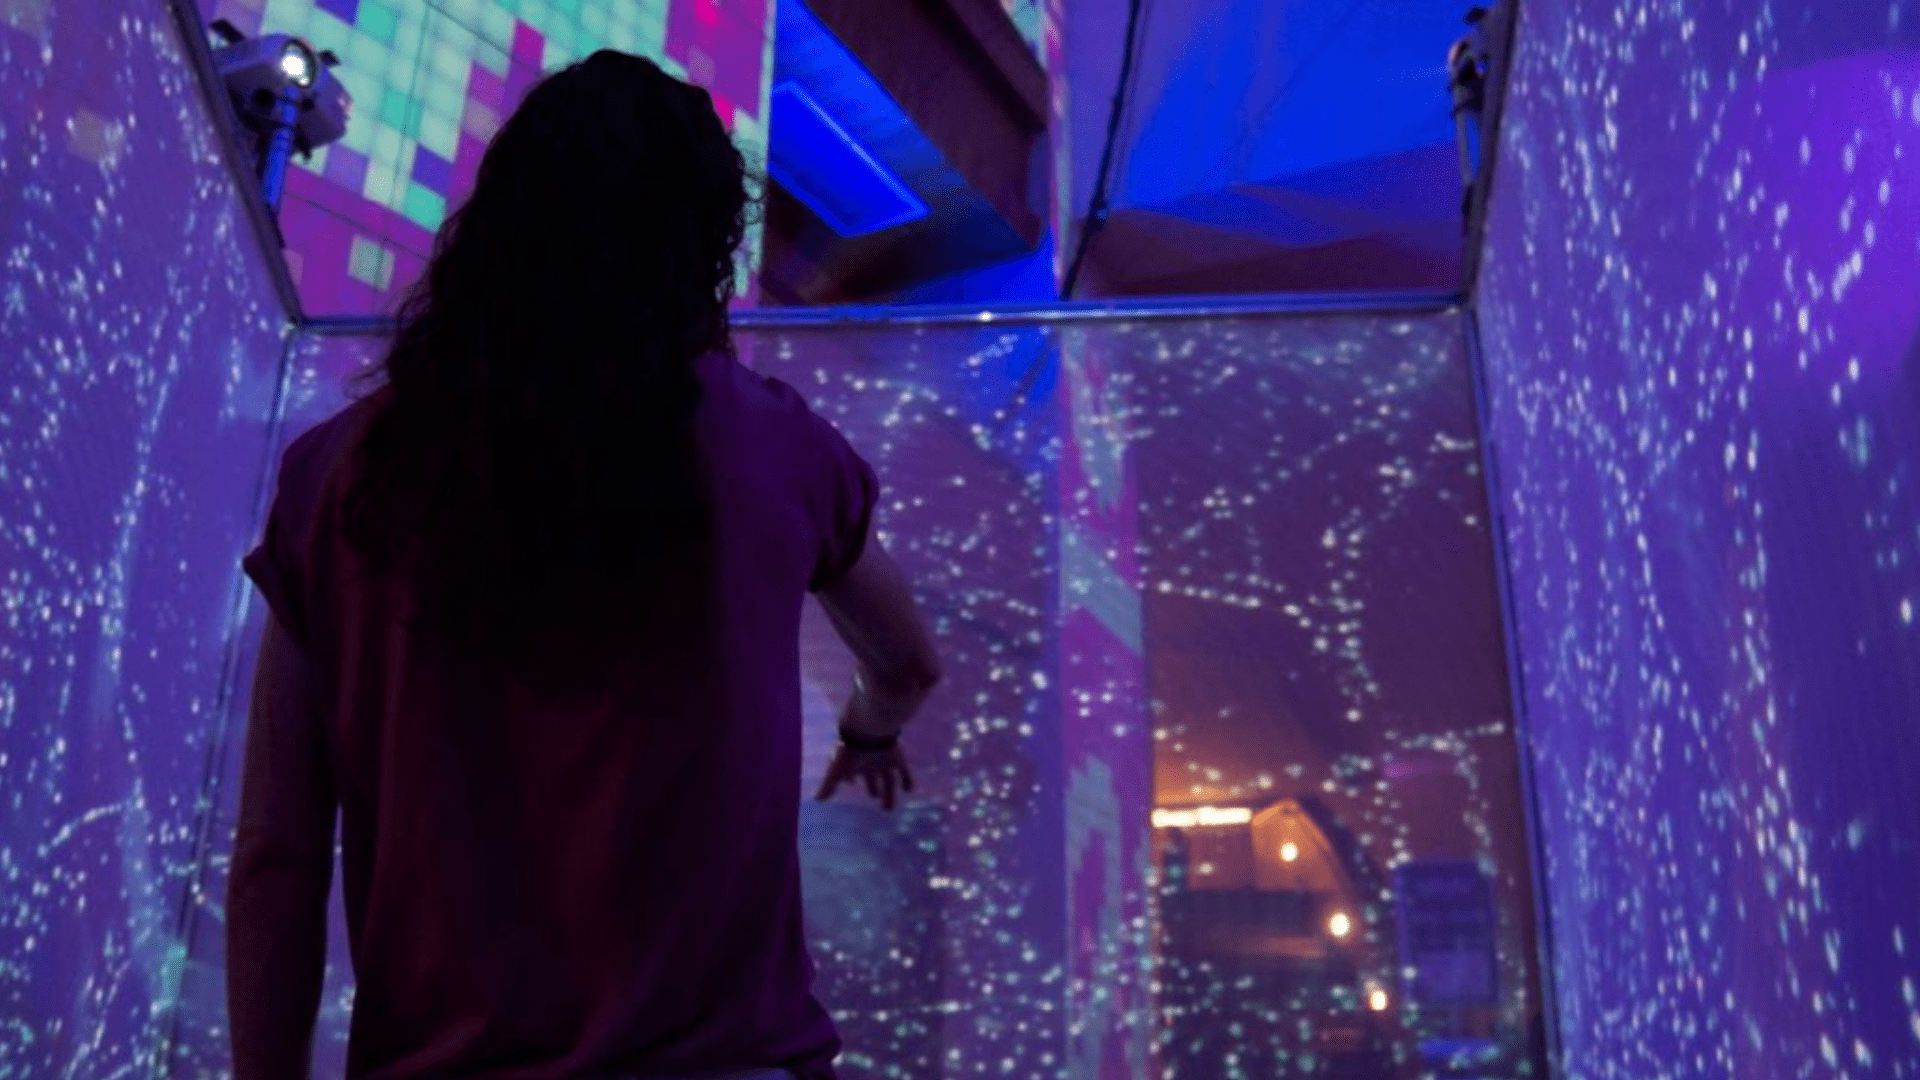 Person walks through immersive media outdoor display at night.